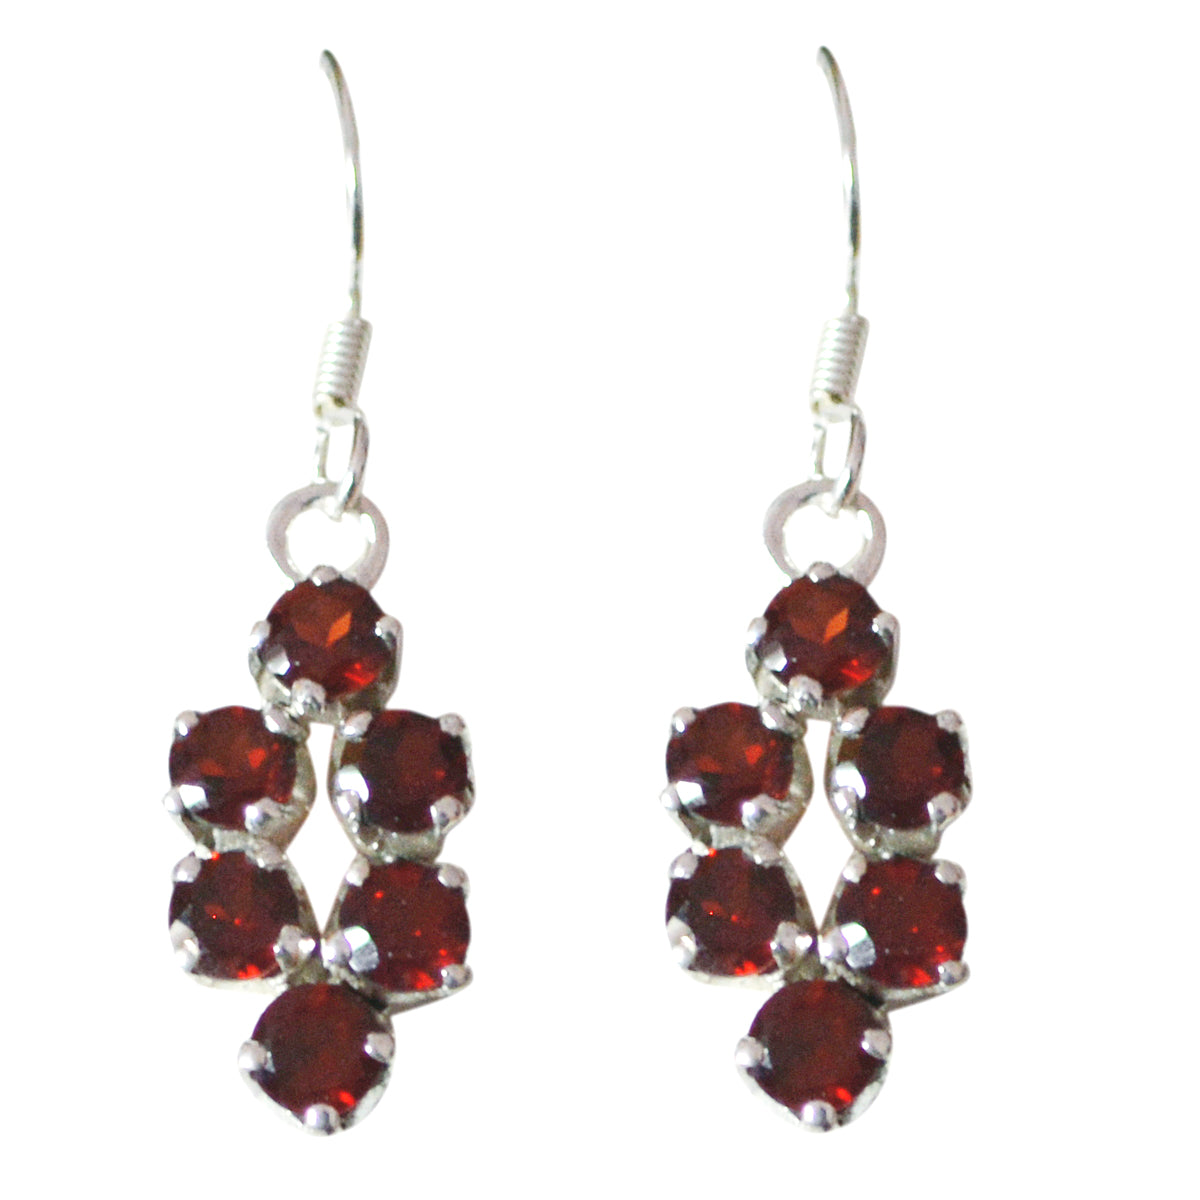 Riyo Natural Gemstone round Faceted Red Garnet Silver Earring gift for halloween